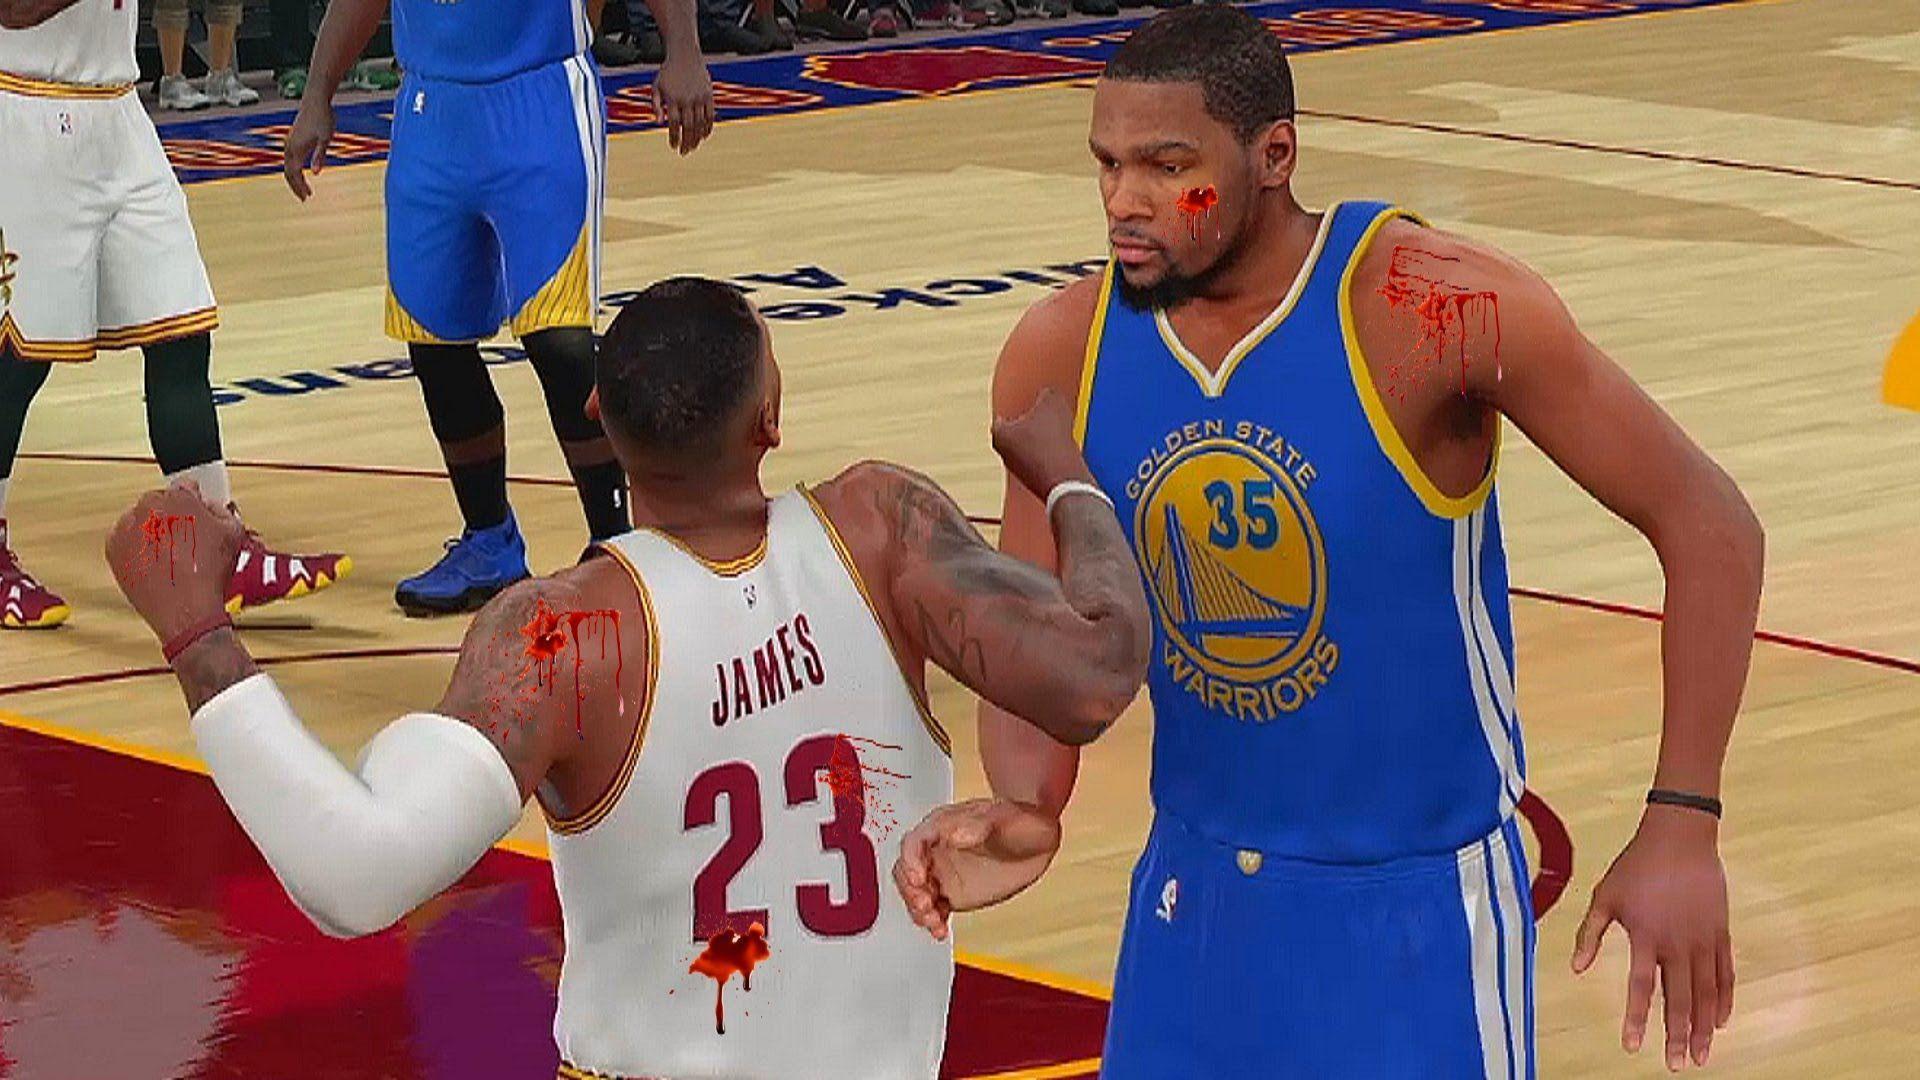 LEBRON JAMES FIGHTS KEVIN DURANT & STEPHEN CURRY PARODY! WARRIORS